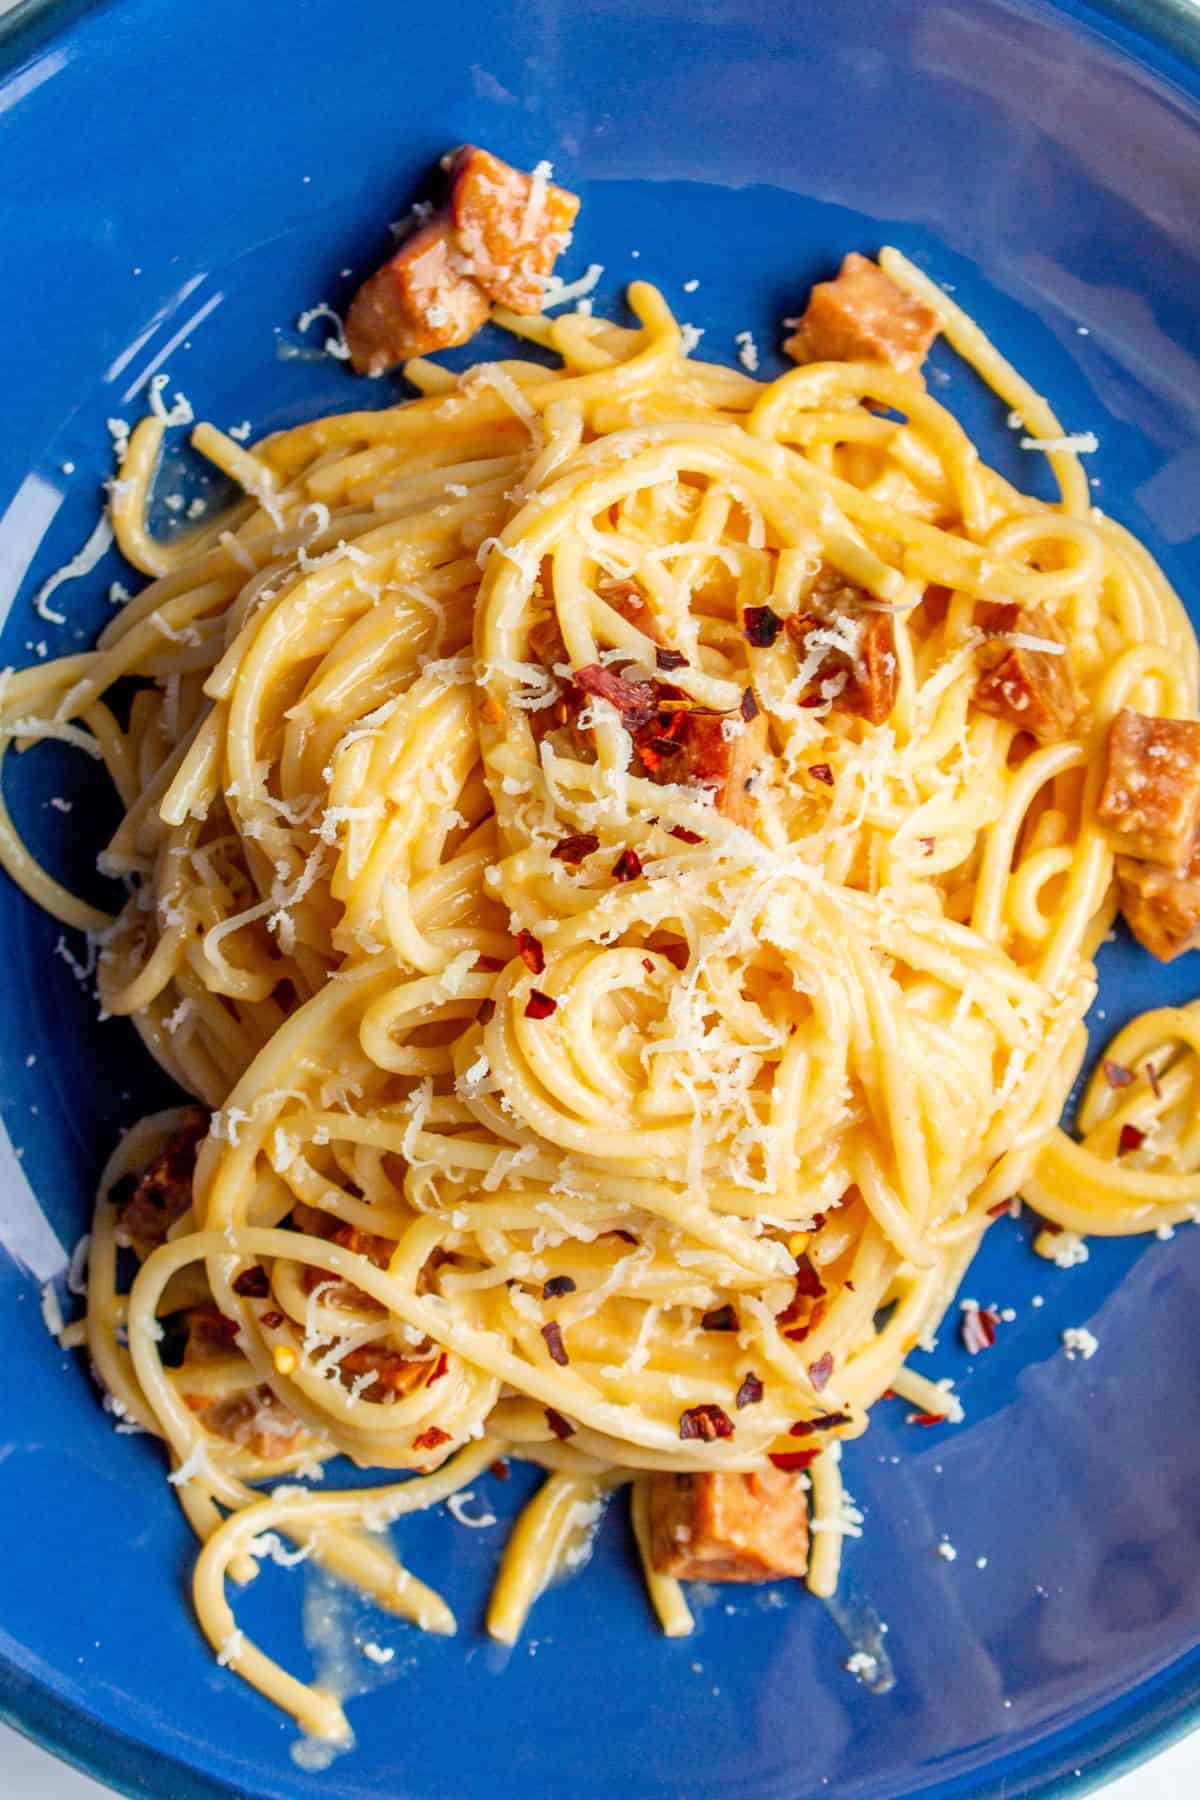 Chorizo carbonara served in a blue bowl with grated parmesan.